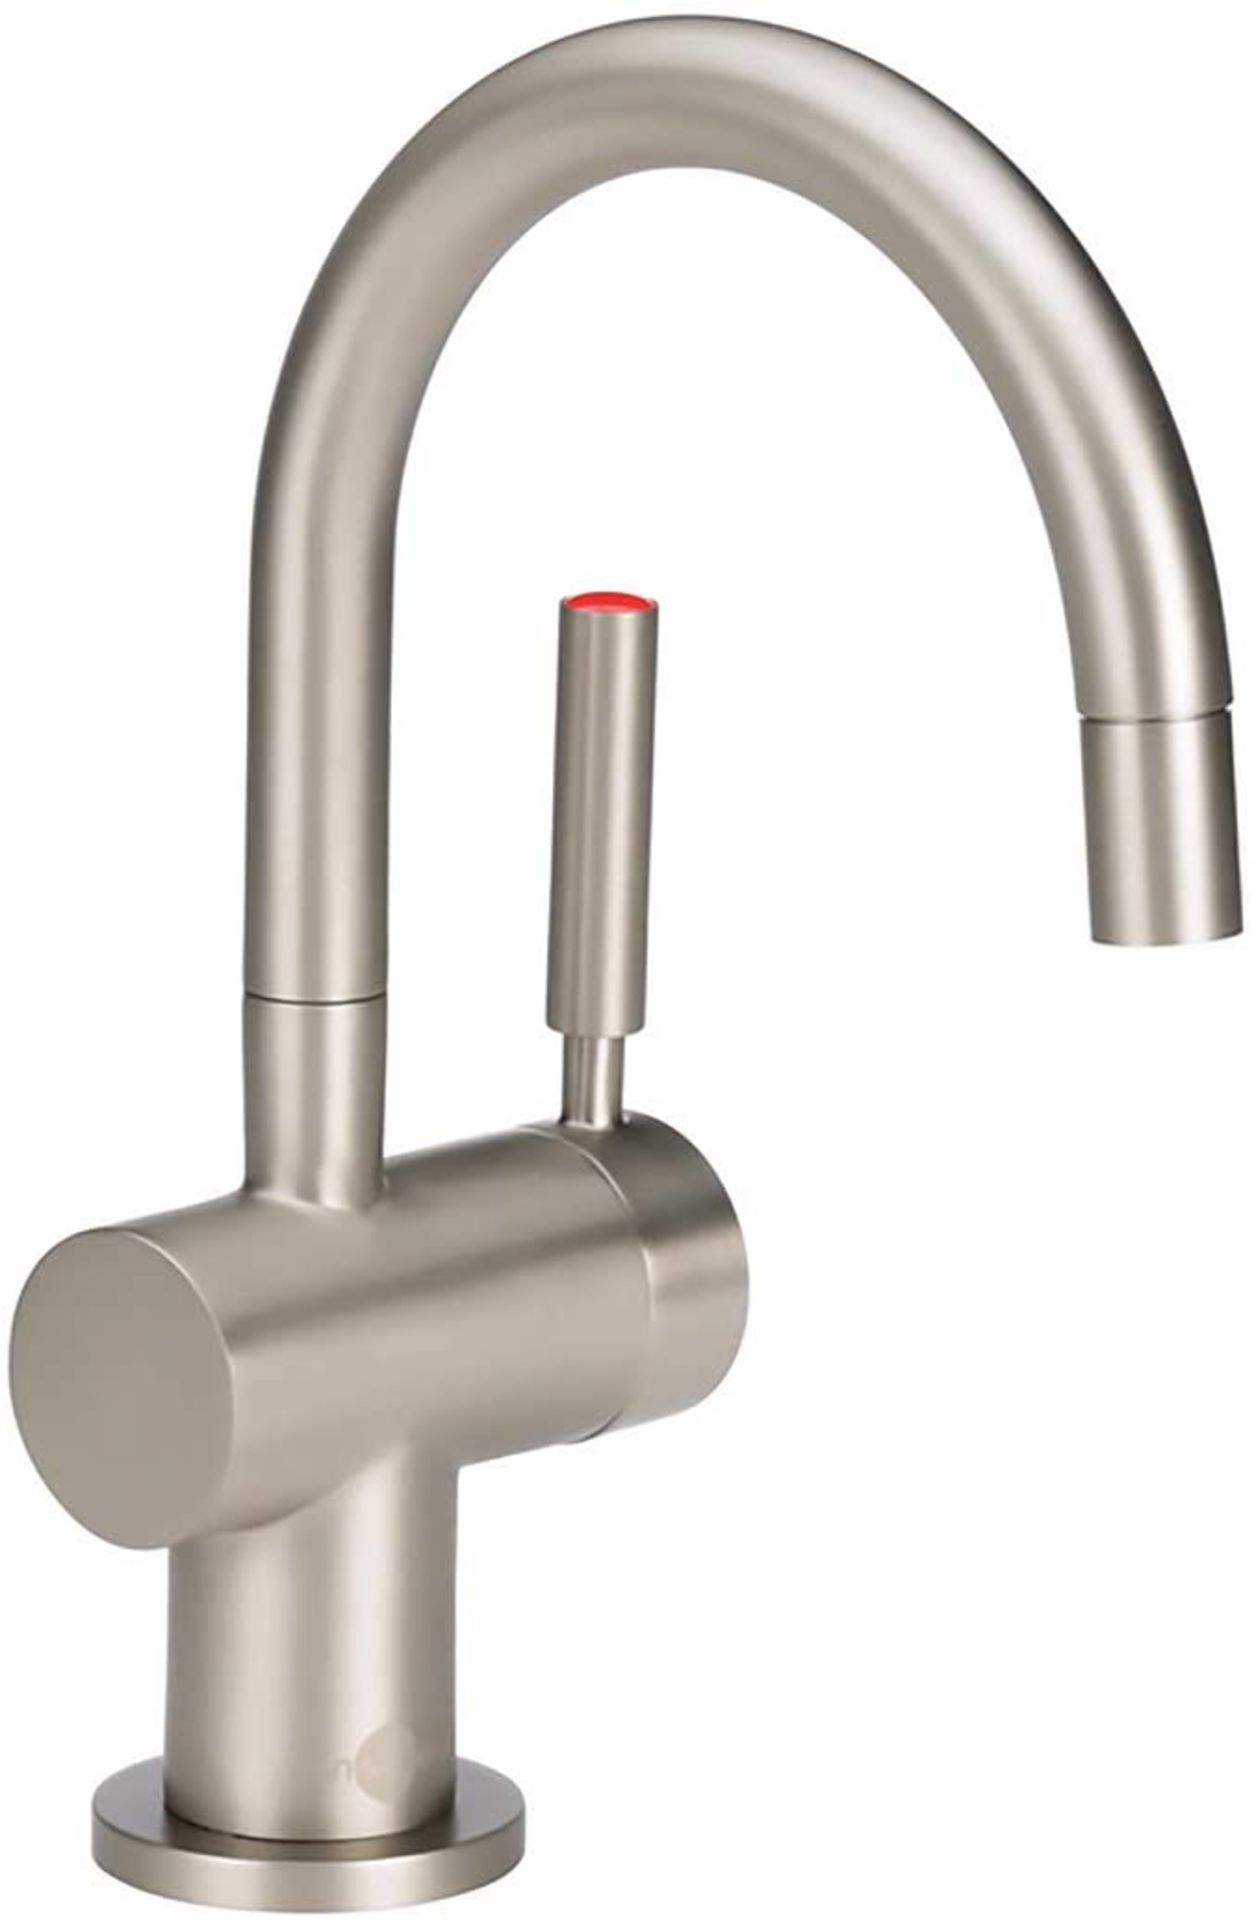 NEW (CC9) InSinkErator Modern Instant Hot Water Dispenser - Faucet Only, Satin Nickel, F-H3300S... - Image 2 of 4